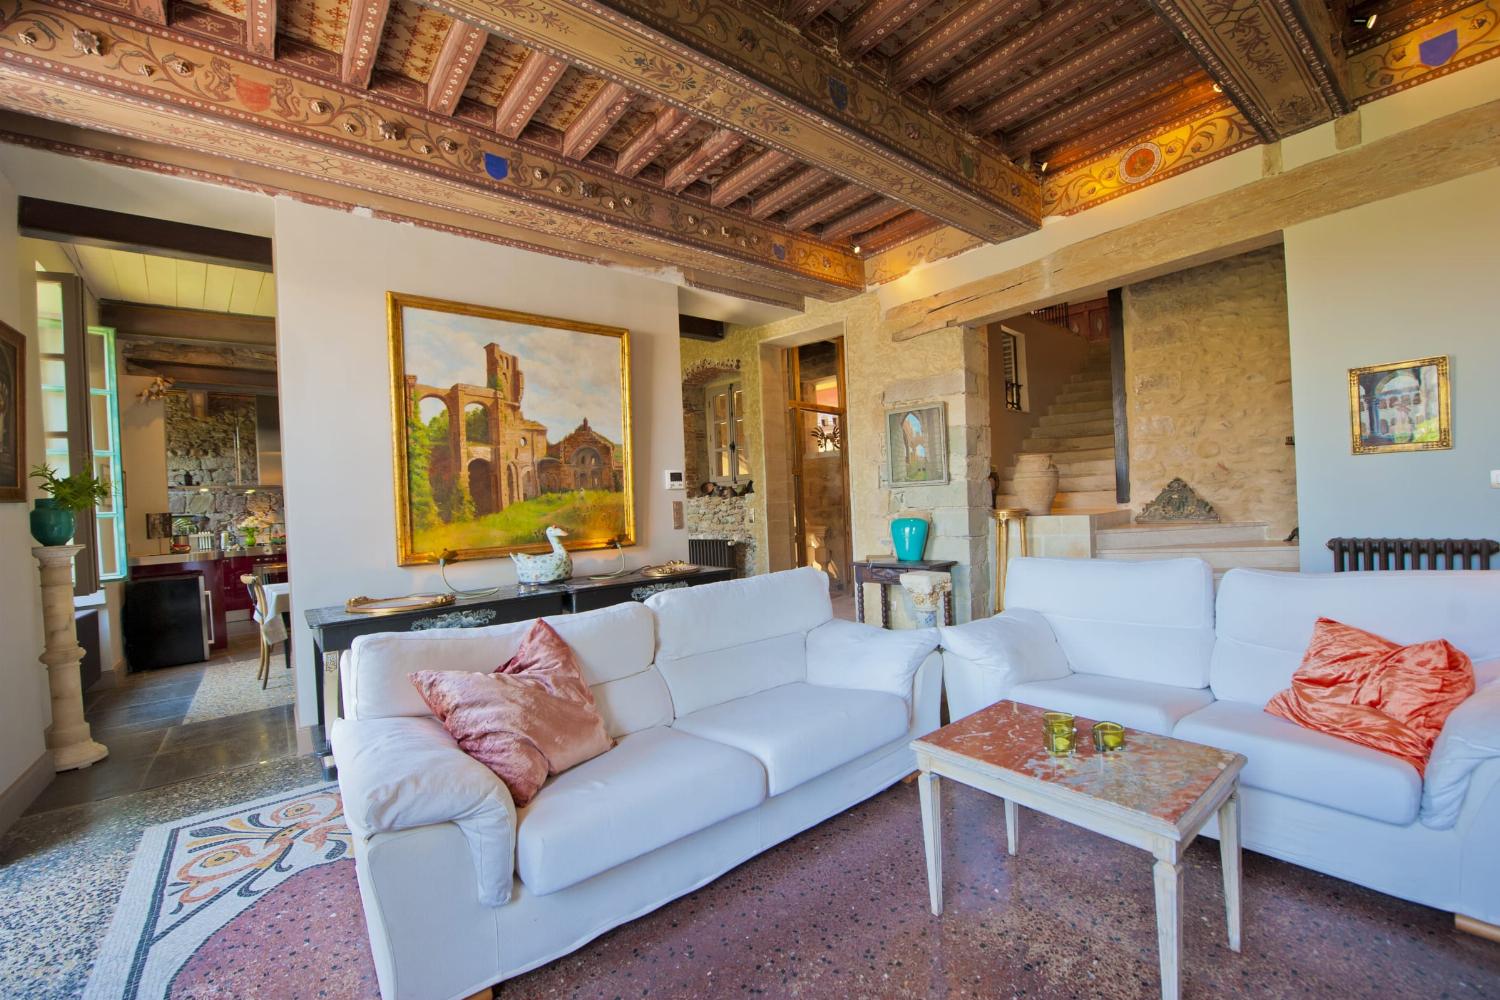 Living room | Rental home in South of France